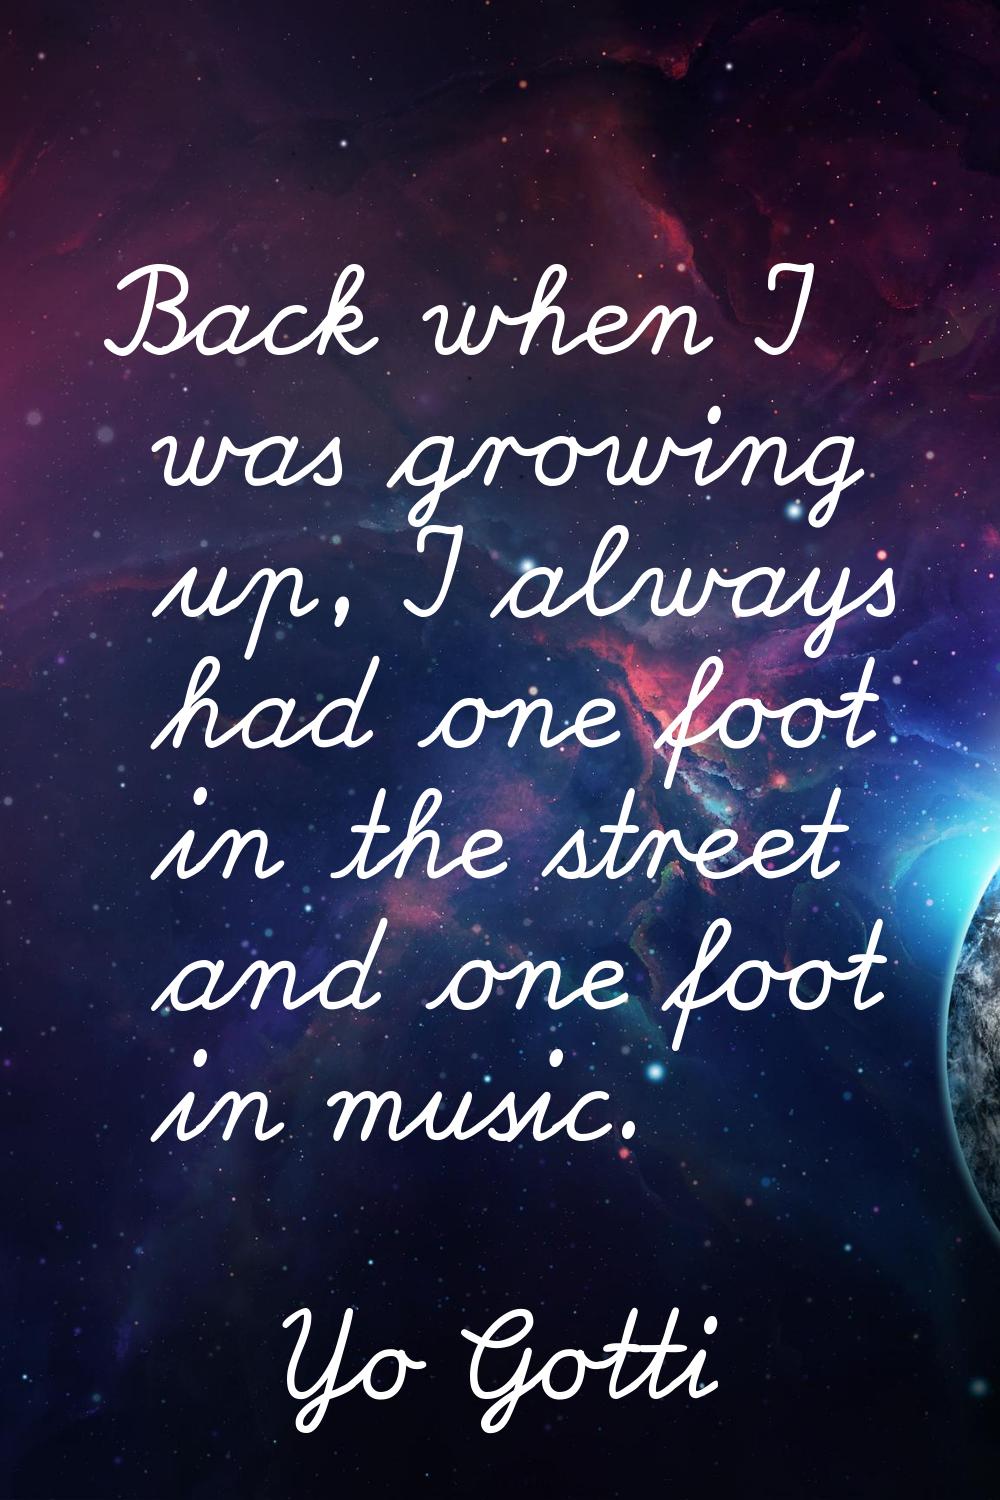 Back when I was growing up, I always had one foot in the street and one foot in music.